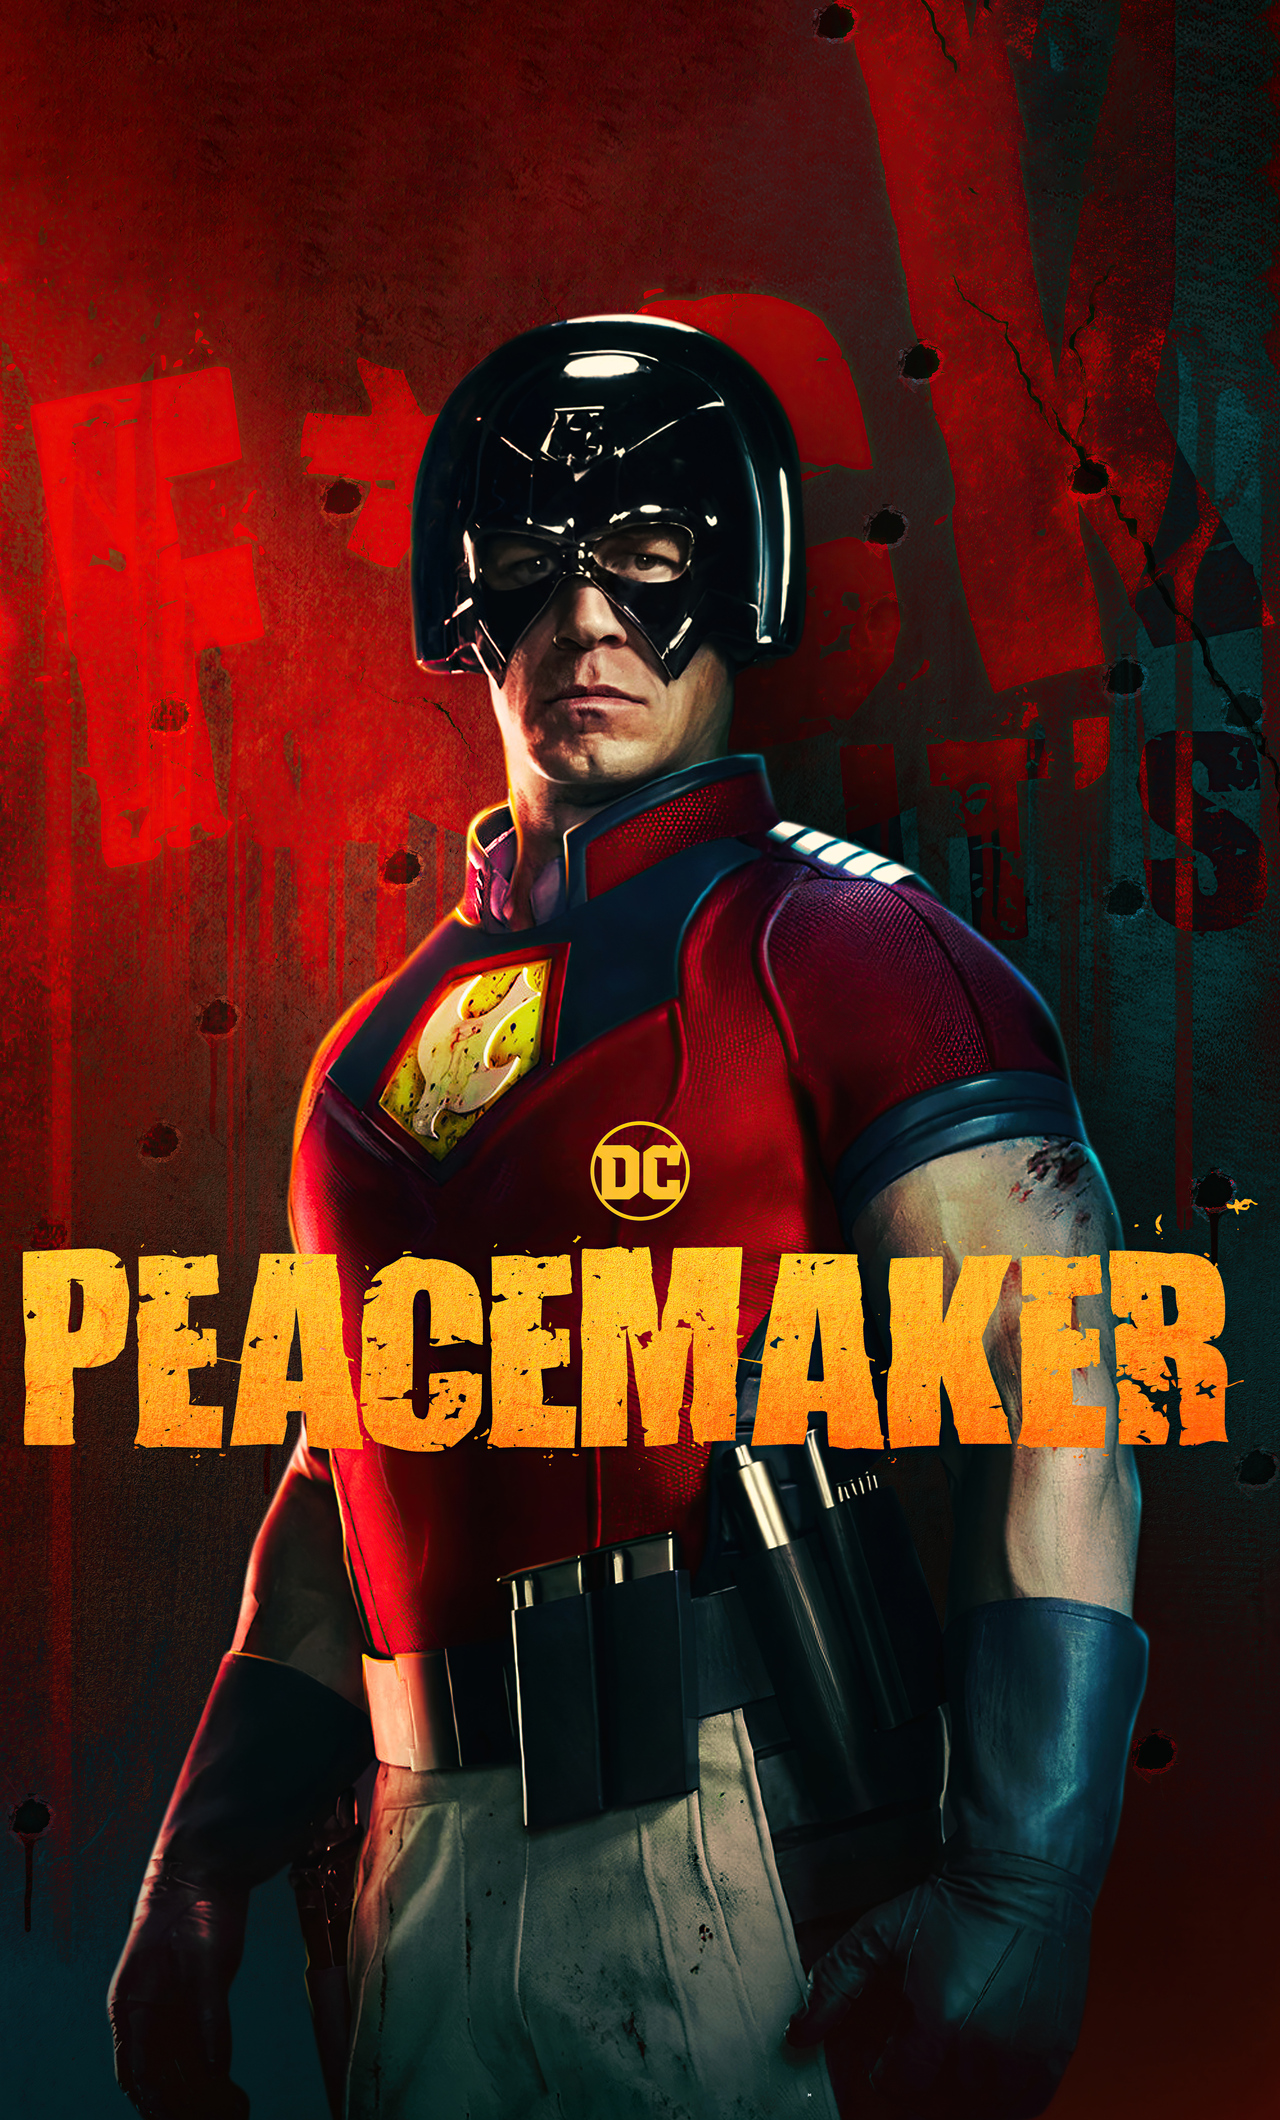 John Cena Peacemaker In Suicide Squad Wallpapers